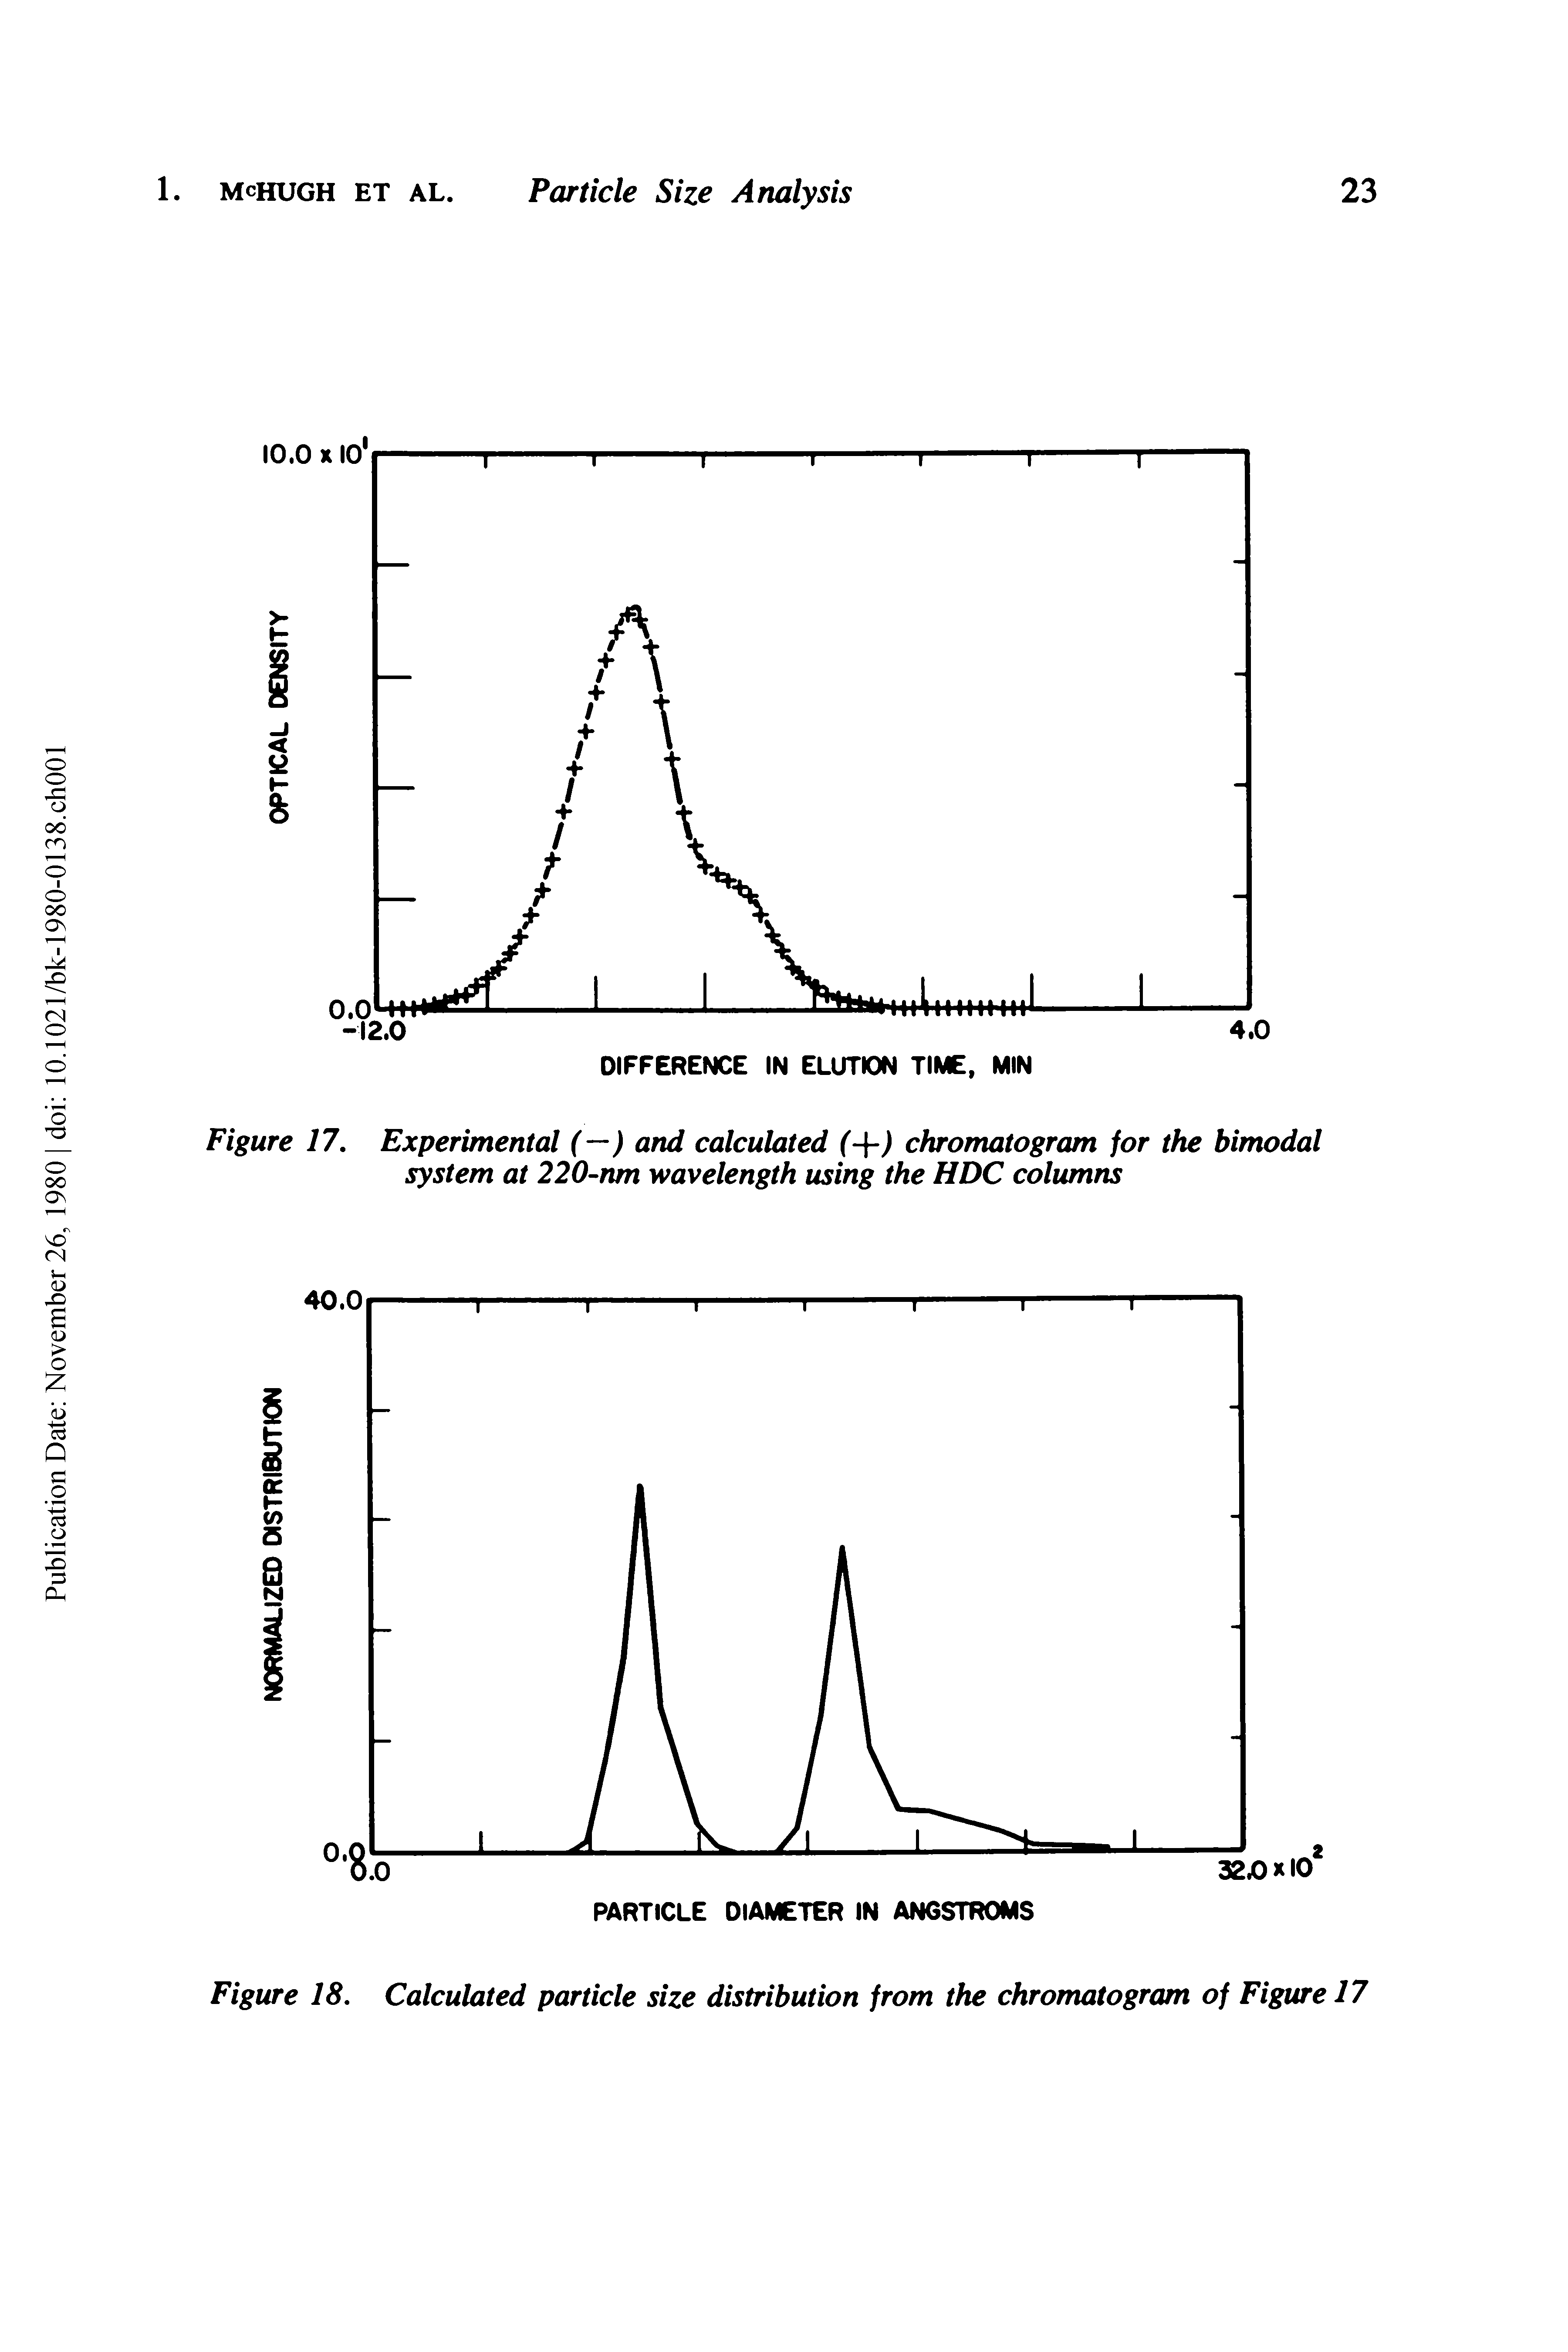 Figure 17. Experimental (—) and calculated (+) chromatogram for the bimodal system at 220-nm wavelength using the HDC columns...